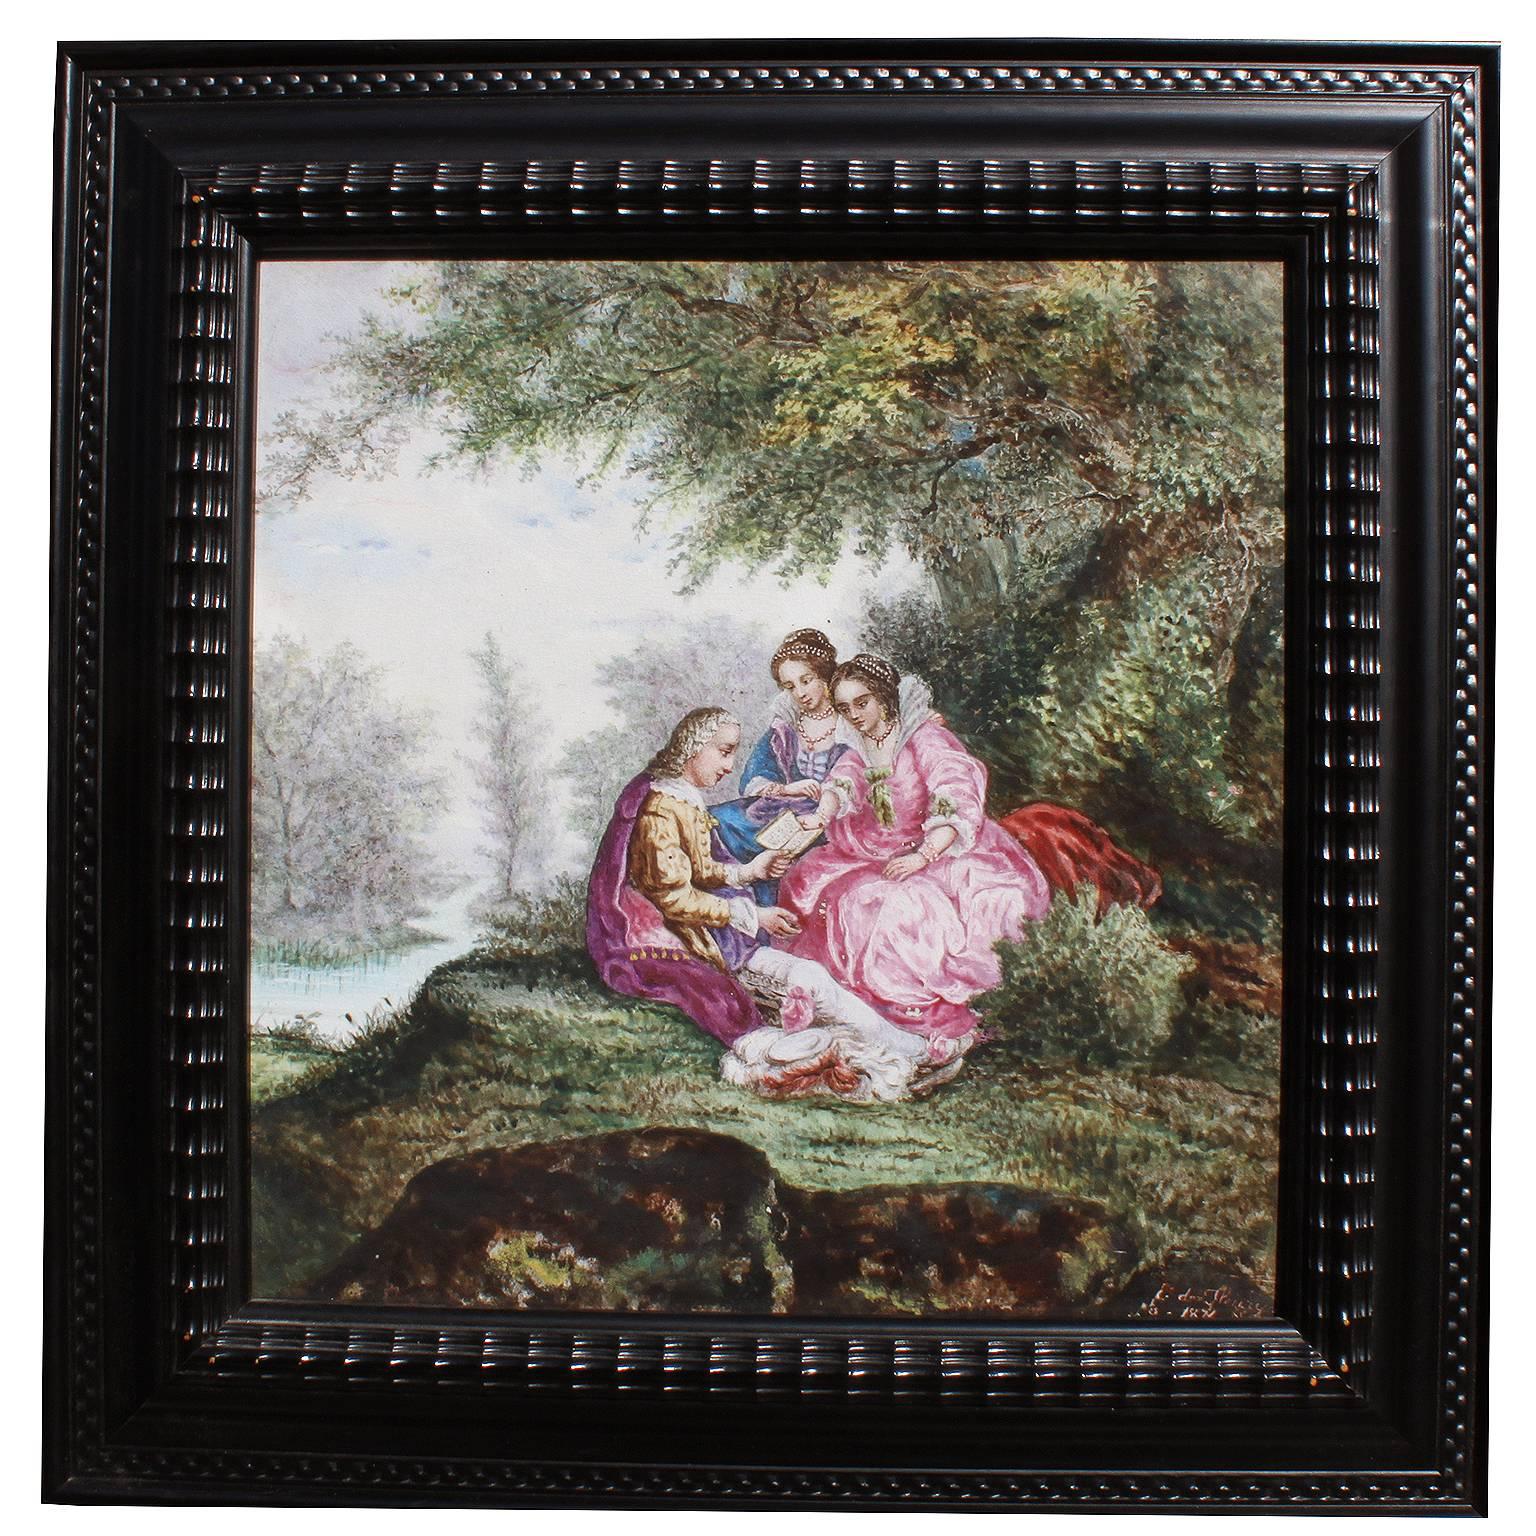 Continental 19th Century Enameled Decorated Porcelain Painted Plaque "Courting" For Sale